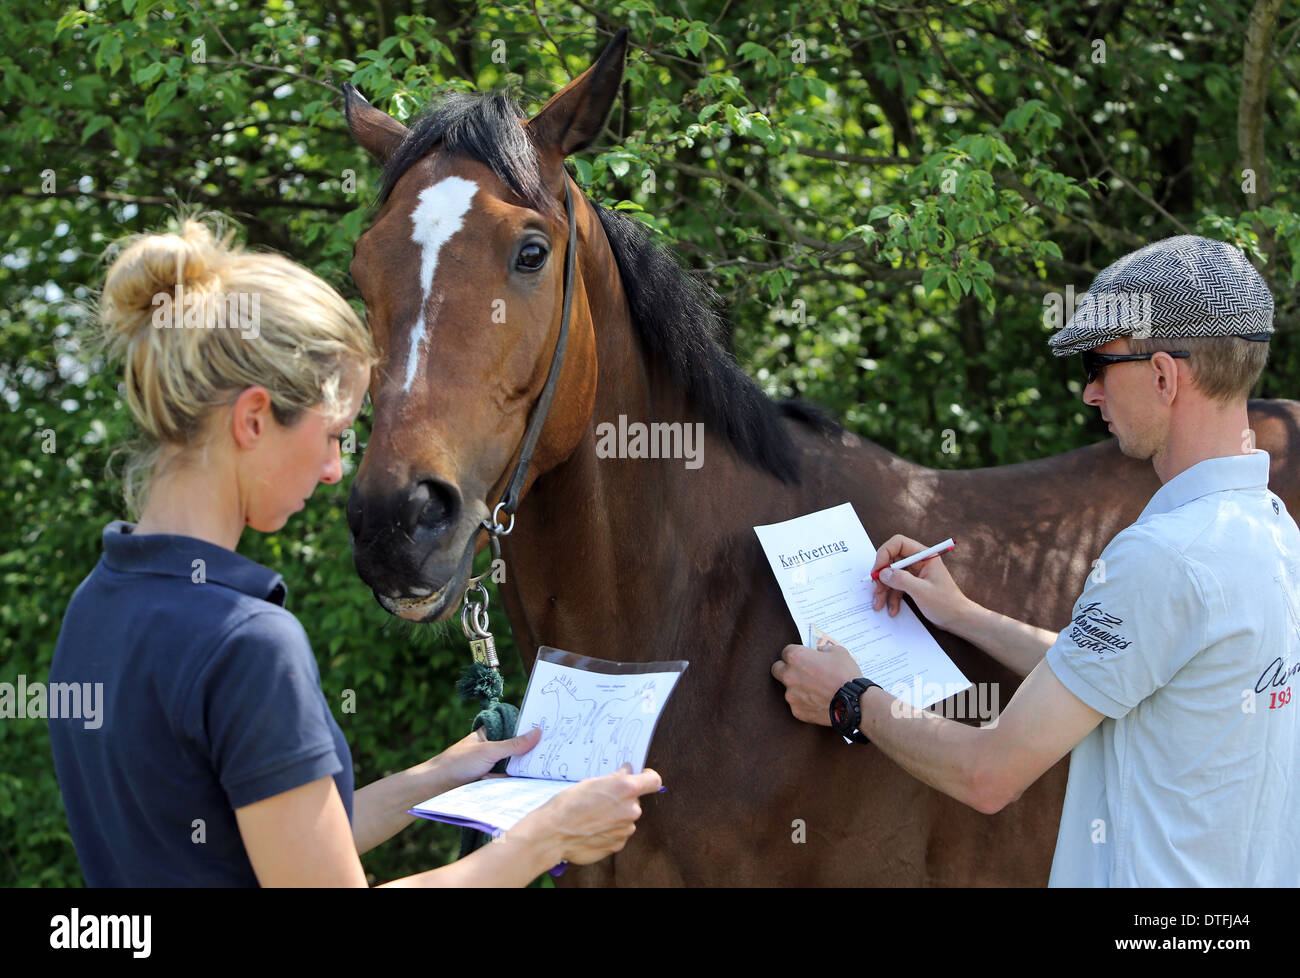 Koenigs Wusterhausen, Germany, man signed the purchase agreement for a horse Stock Photo